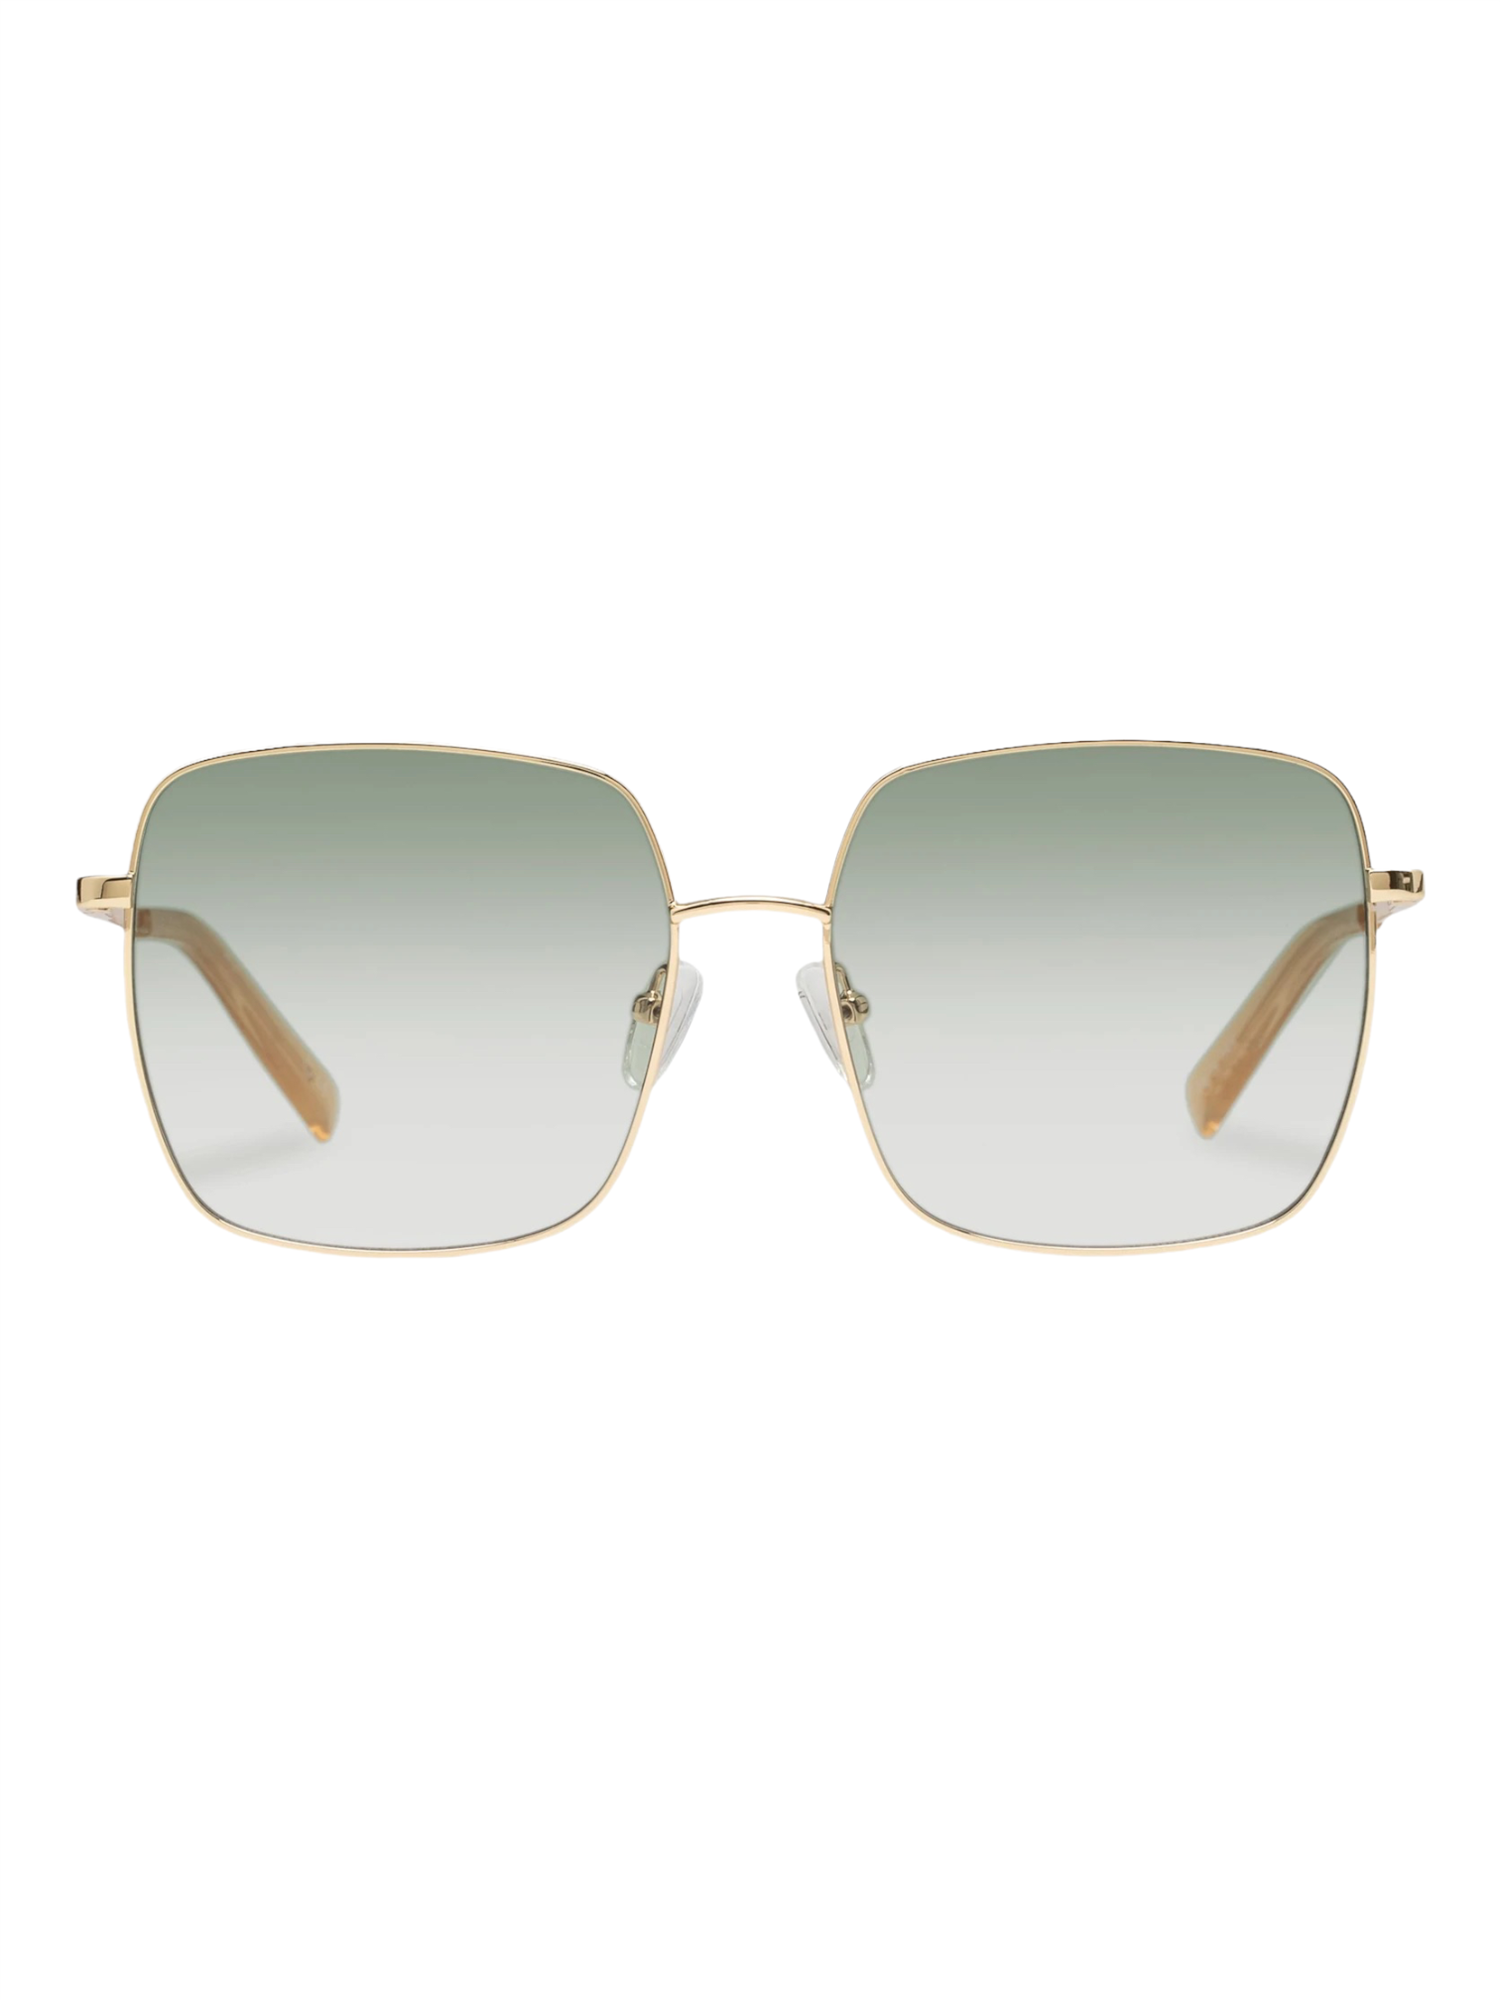 THE CHERISHED *LIMITED EDITION* / BRIGHT GOLD W/ GREEN GRAD LENS